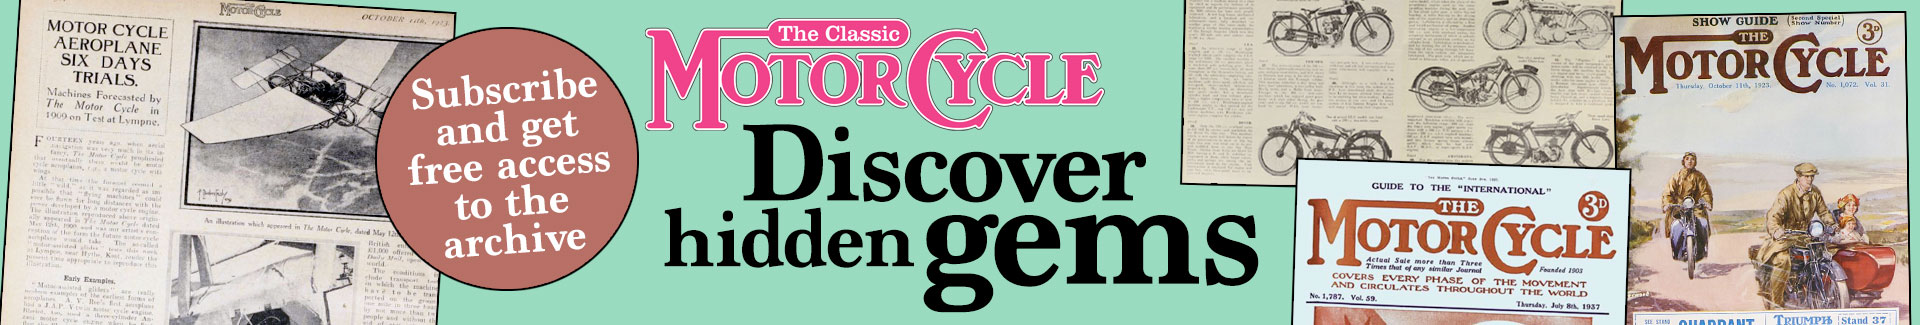 Subscribe to The Classic Motorcycle